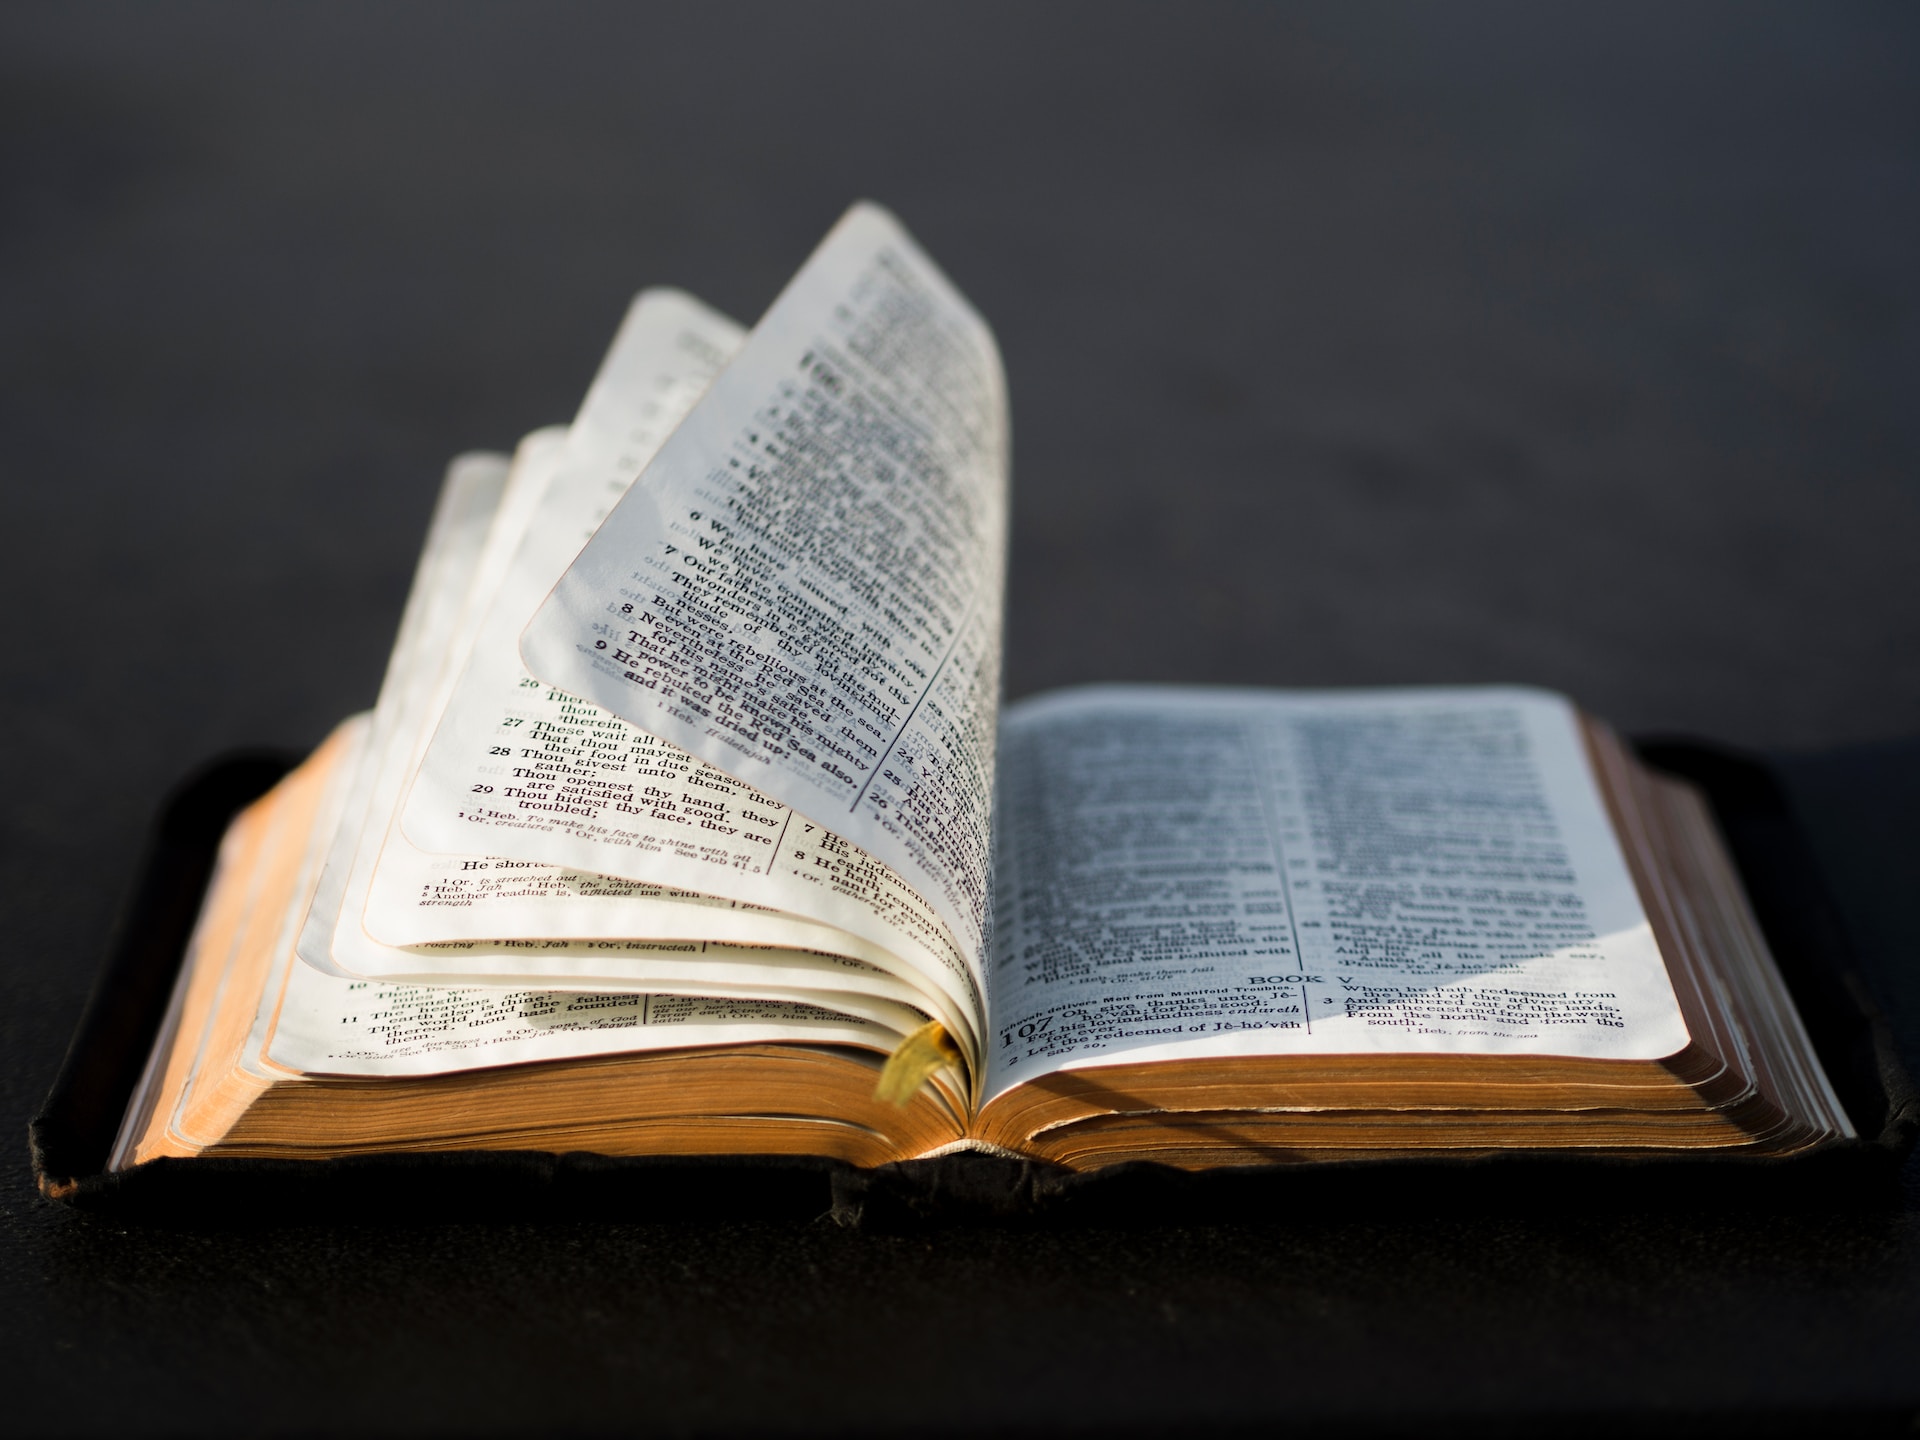 Bible banned in several Utah schools due to ‘vulgarity and violence’